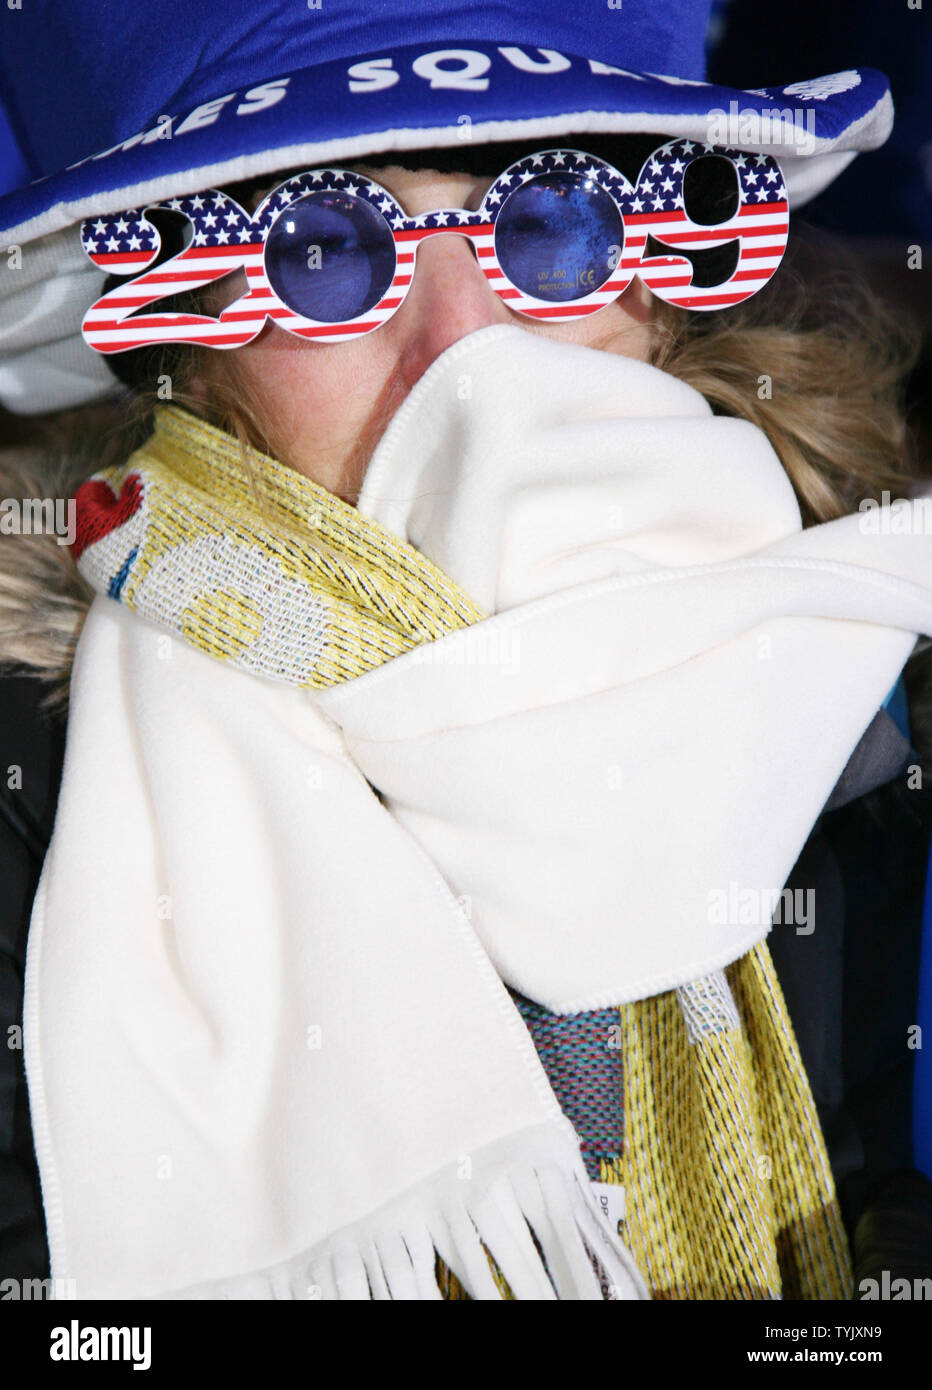 Deri Diaz of Naples, Florida tries to keep warm as she joins the thousands of revelers gathered in Times Square in sub-freezing temperatures as they celebrate New Year's Eve on December 31, 2008 in New York City. (UPI Photo/Monika Graff) Stock Photo